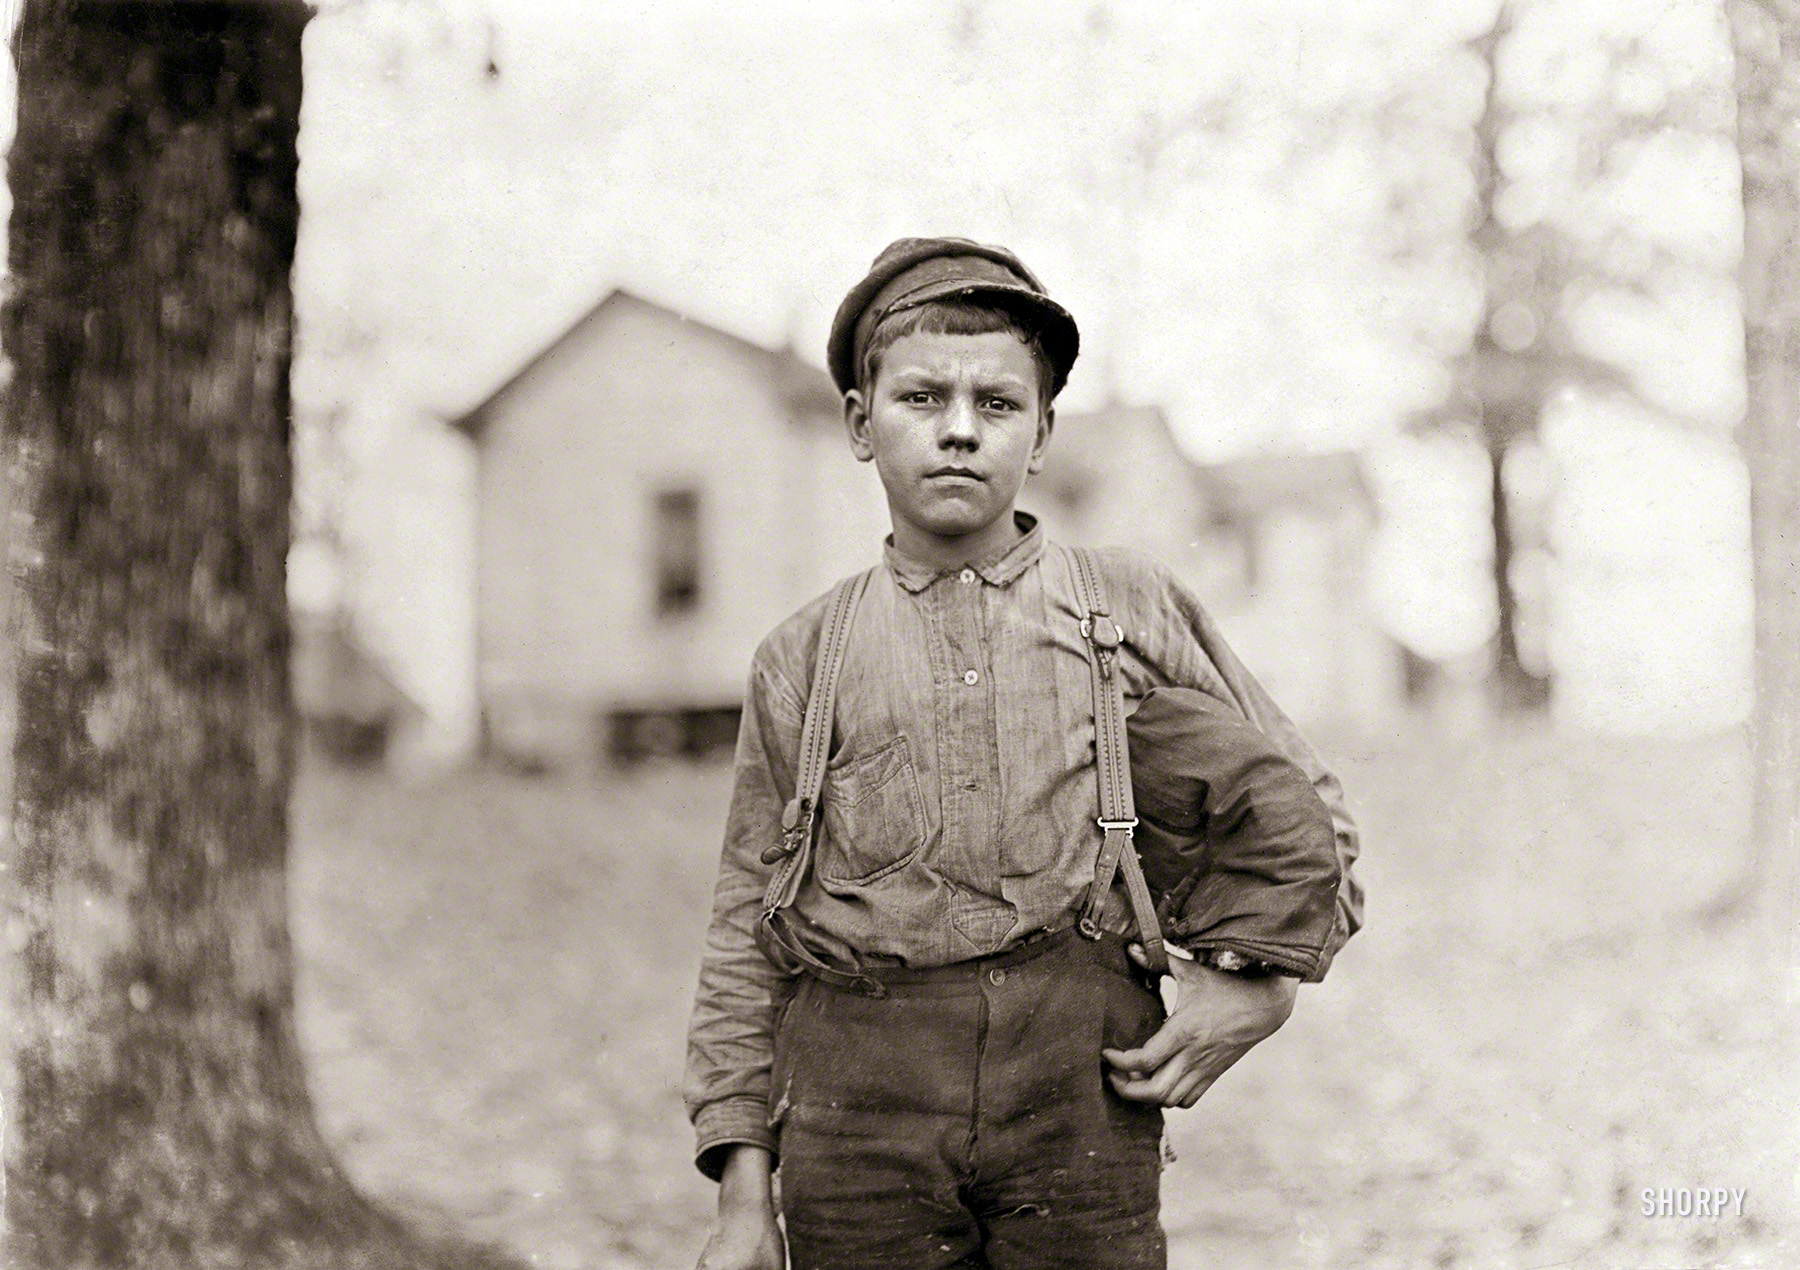 November 1908. "Chester, S.C. -- Springstein Mills. Archie Love. Said (after hesitating), 'I am 14 years old.' Doesn't look it. Been in mill three years. Worked nights five months at the start." Photo by Lewis Wickes Hine. View full size.